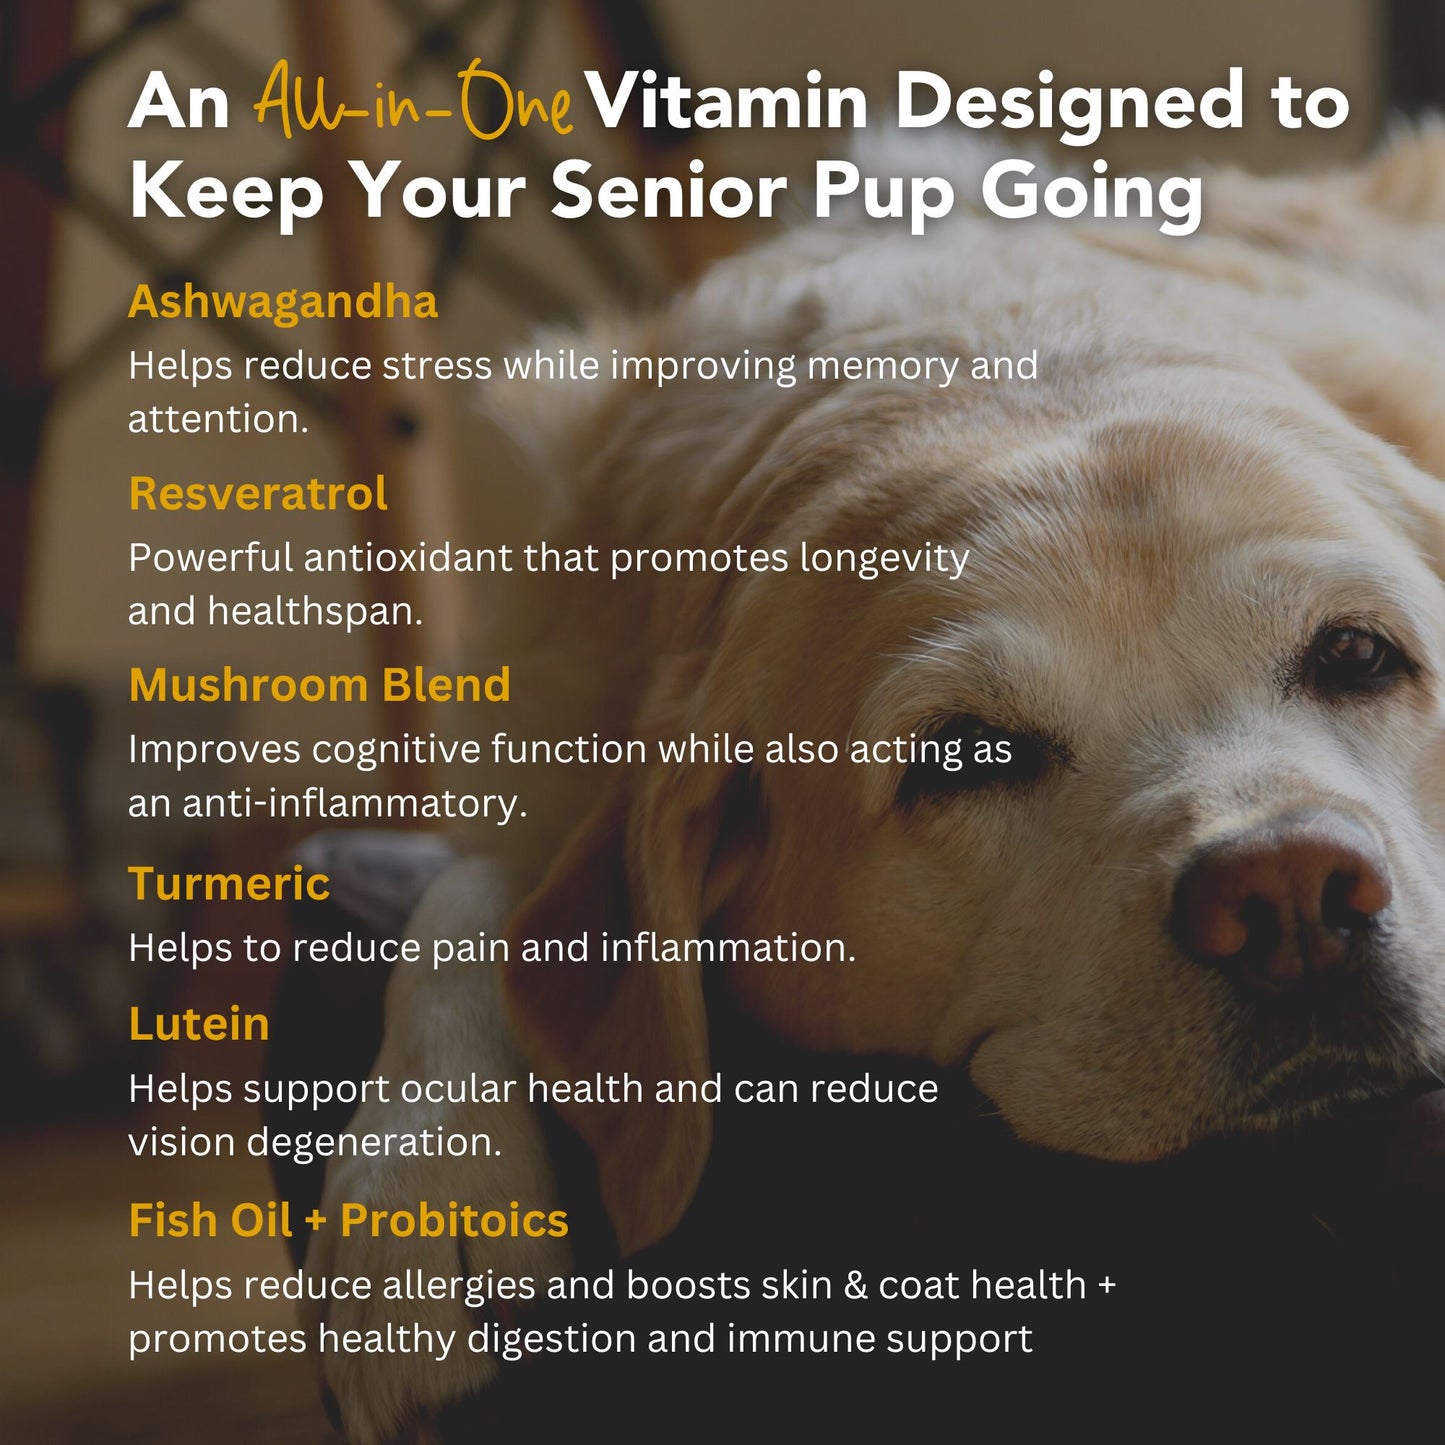 Senior Super 7 Daily MegaVitamin For Dogs 7-In-1 Antioxidant Anti-Aging Support With Probiotics For Longevity and Cognitive Boost - 60 Chews